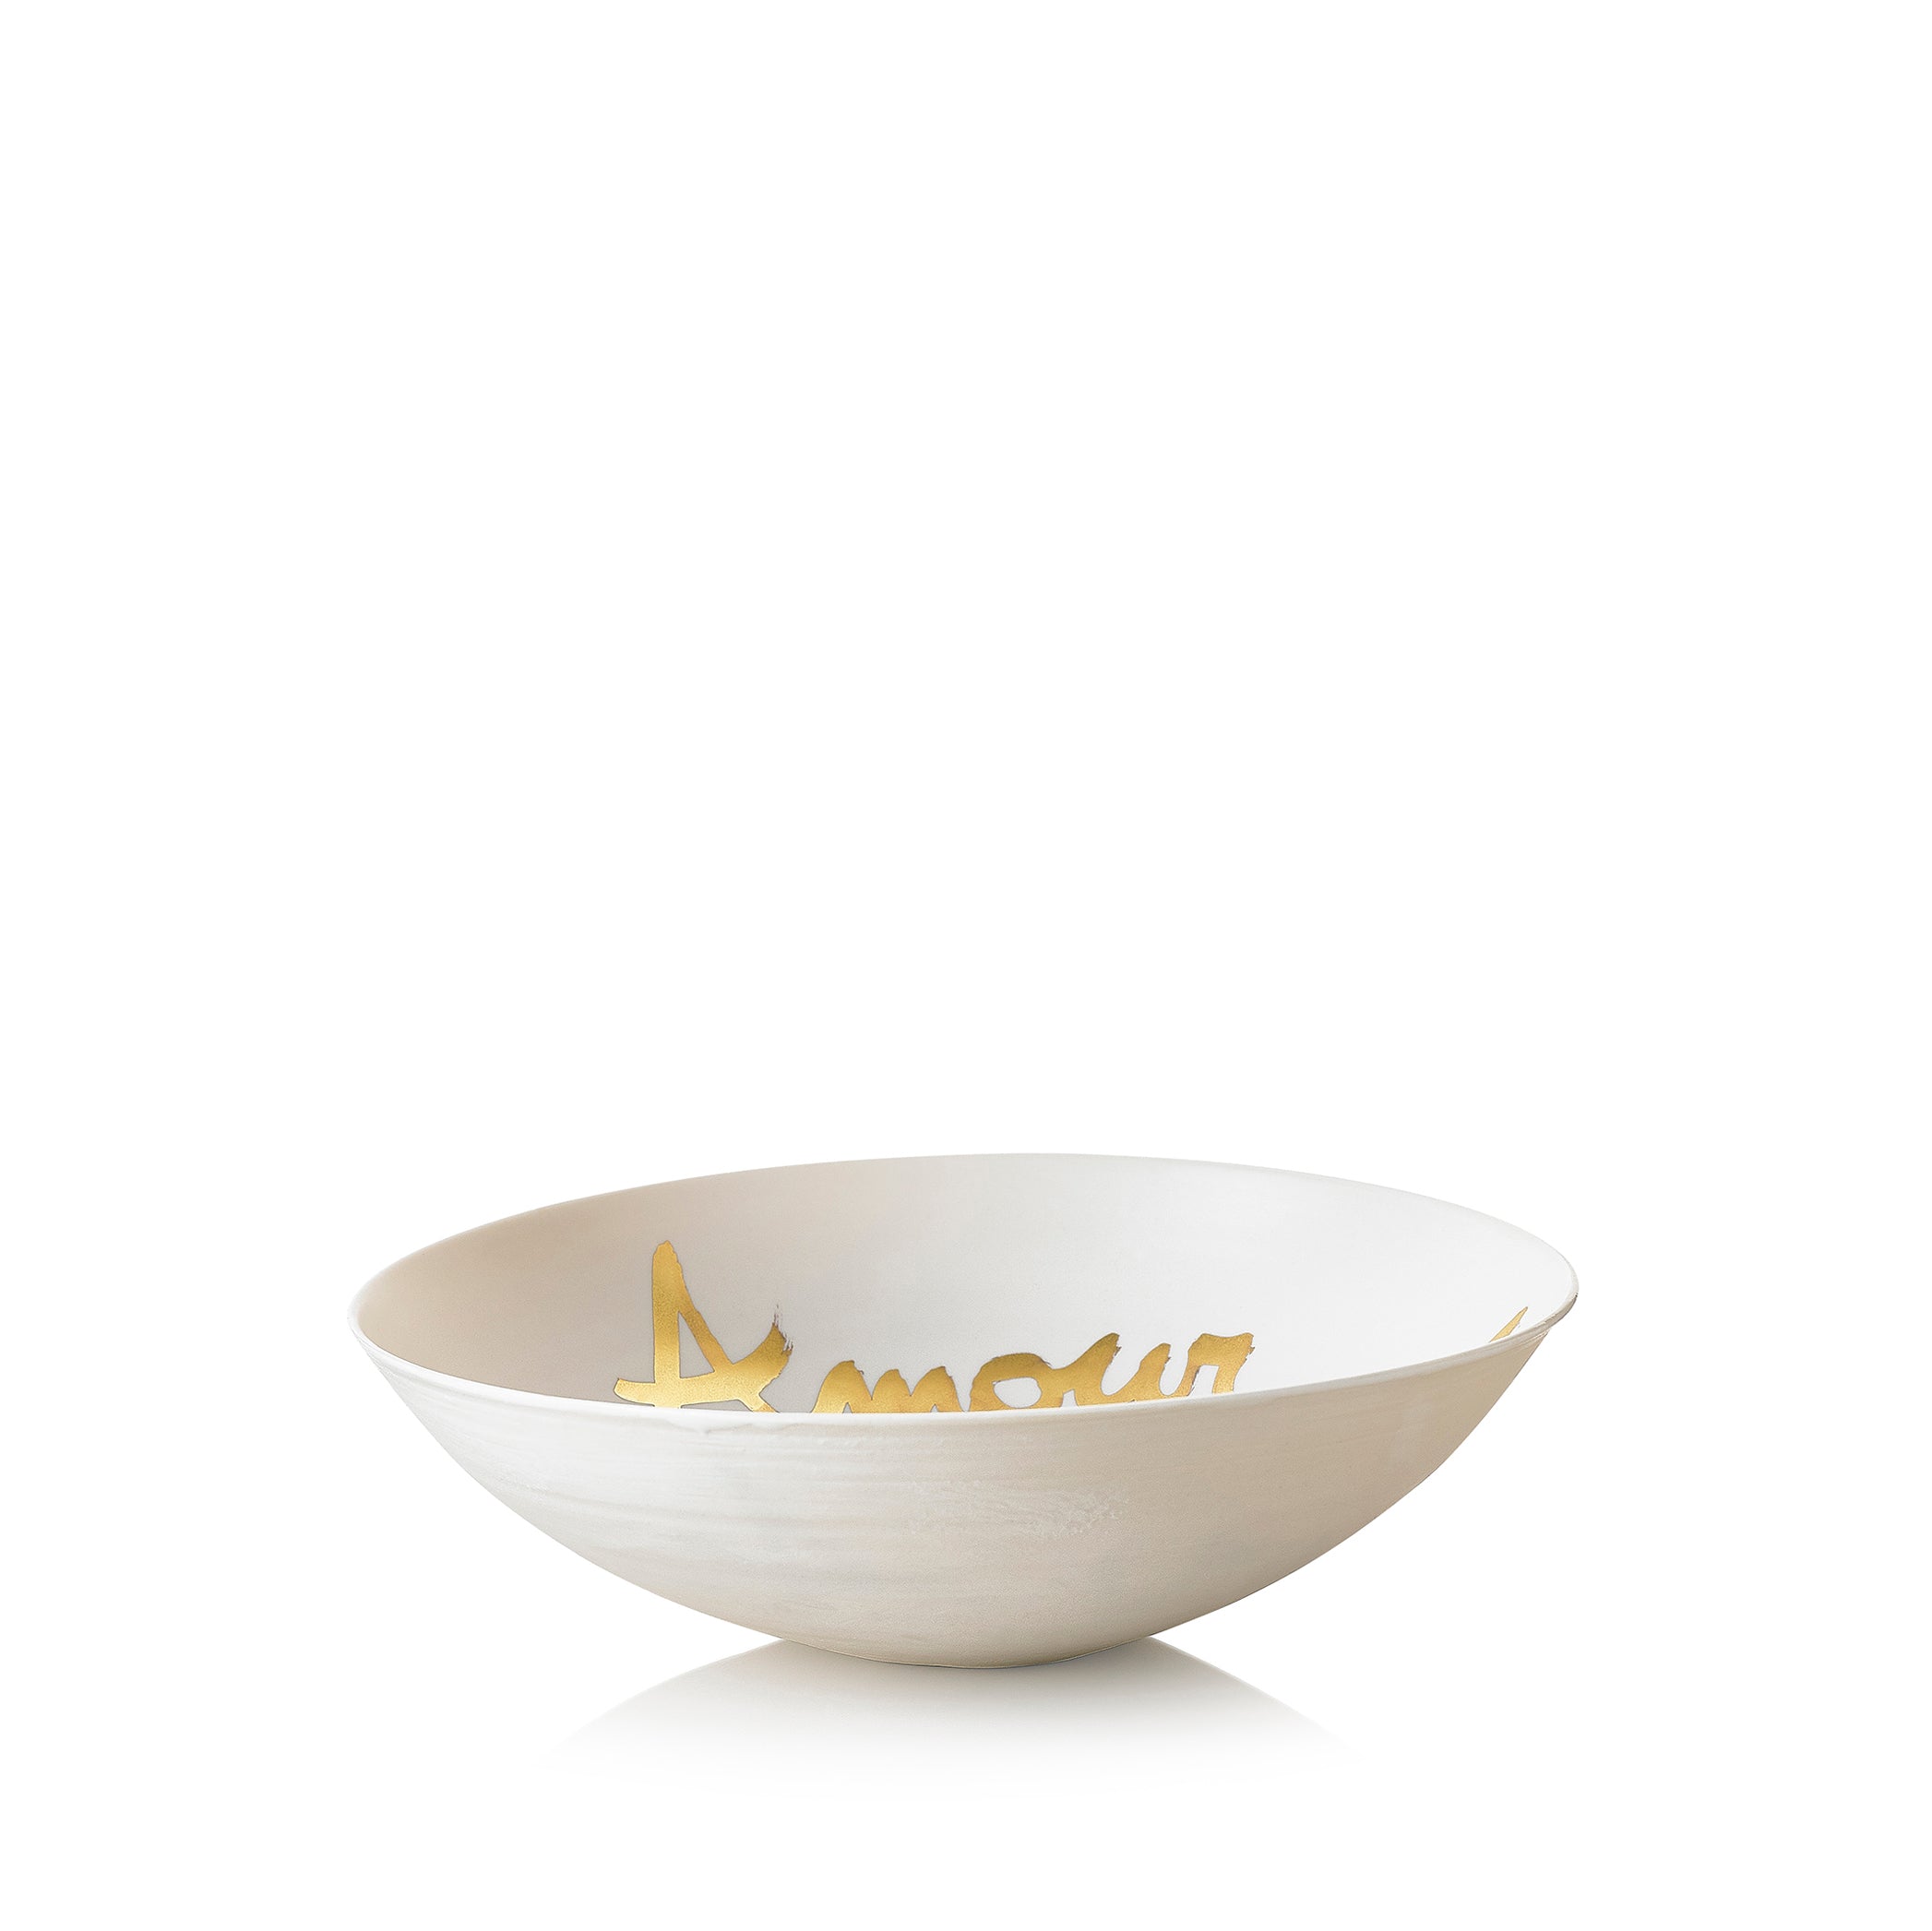 Amour Amour Amour Porcelain Bowl in Matte Gold